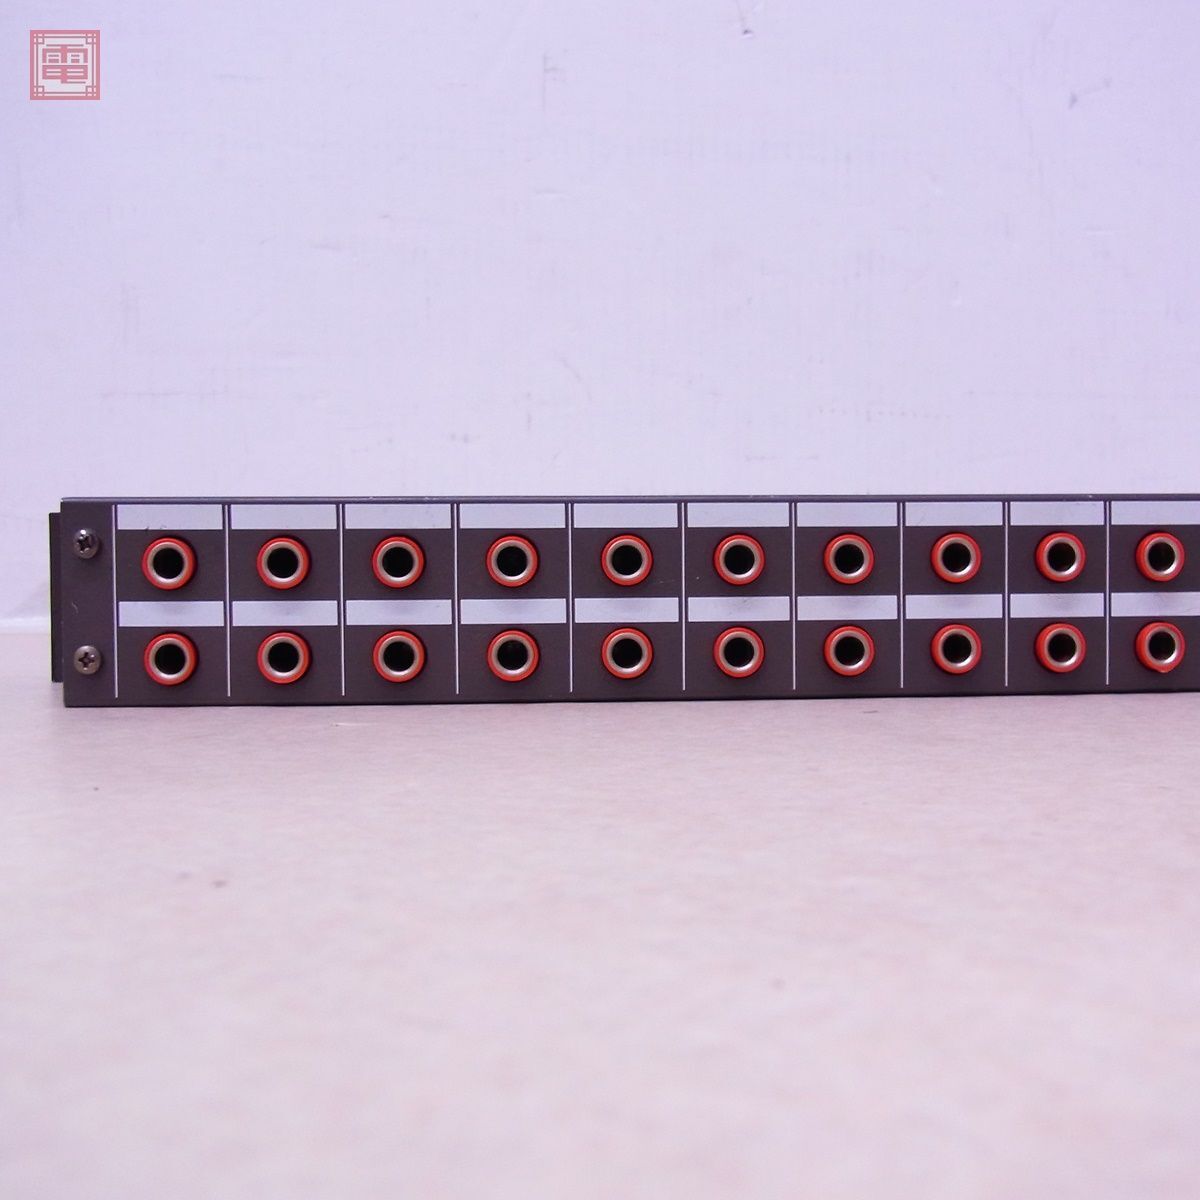 TASCAM PB-32P patch bay PATCH BAY Tascam Teac TEAC Junk parts taking .. please [20